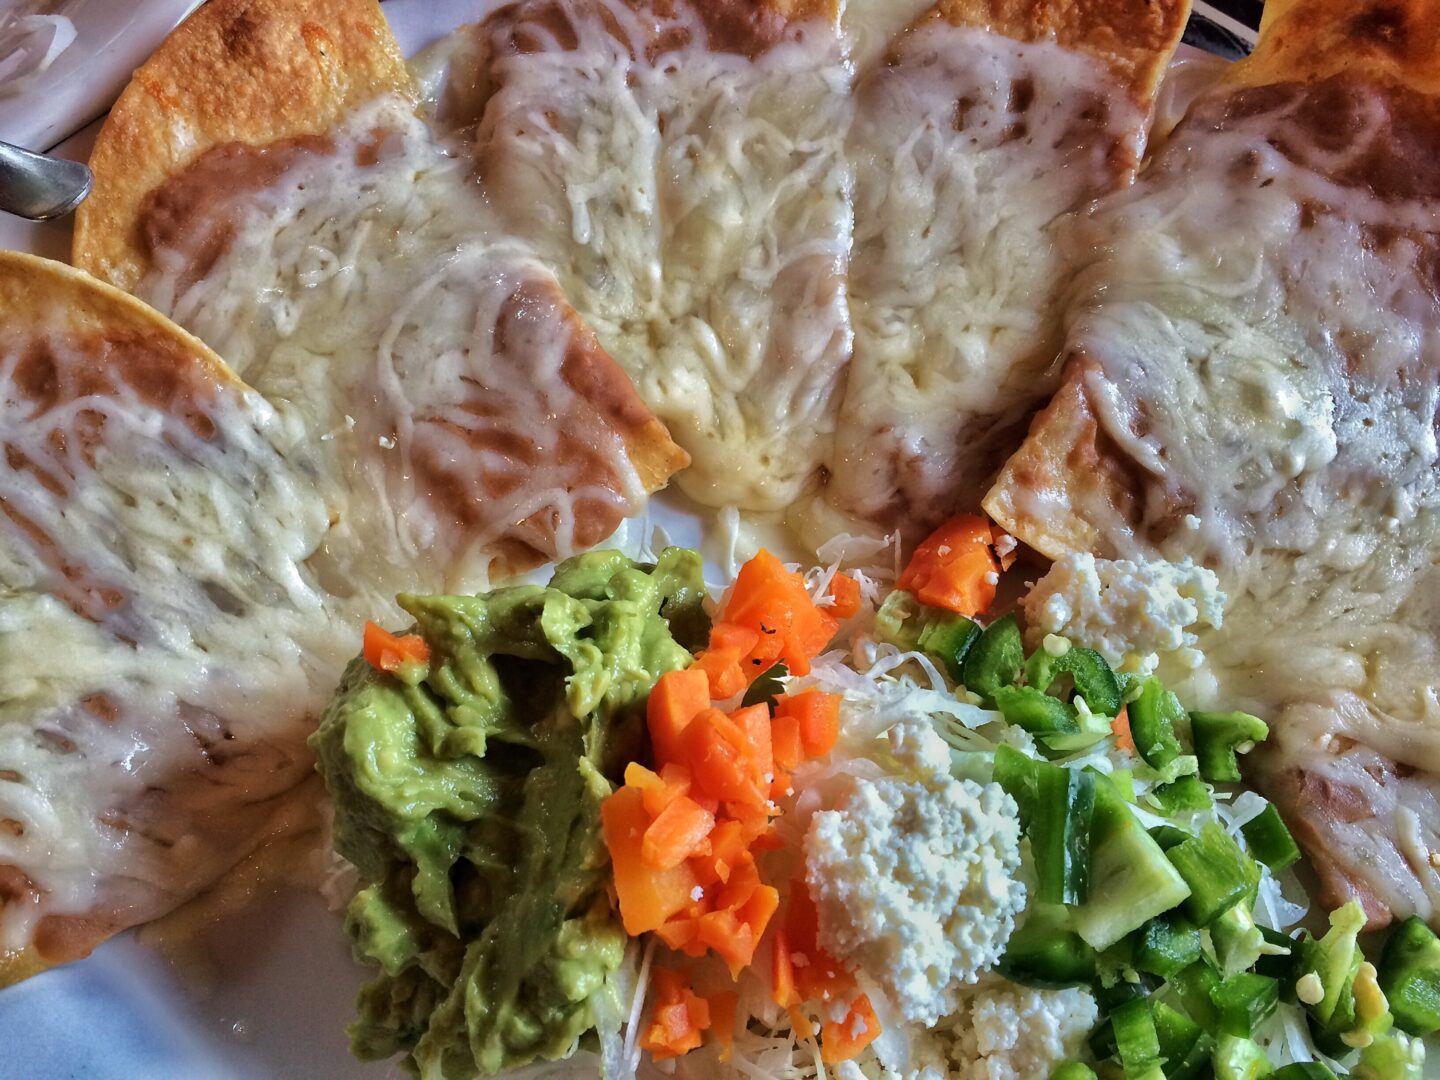 A plate of food with cheese, guacamole, and vegetables.